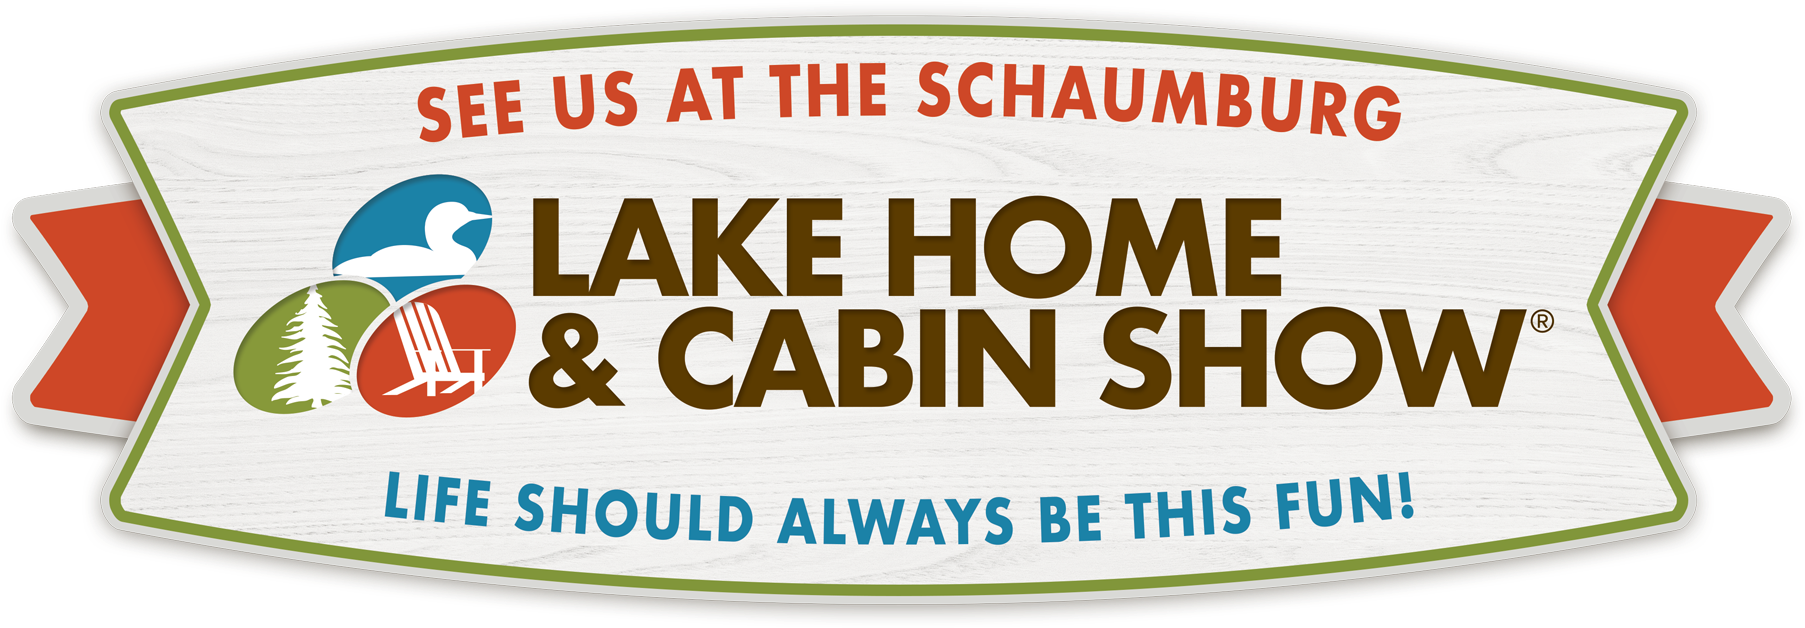 Lake Home Cabin Show Banner PNG image